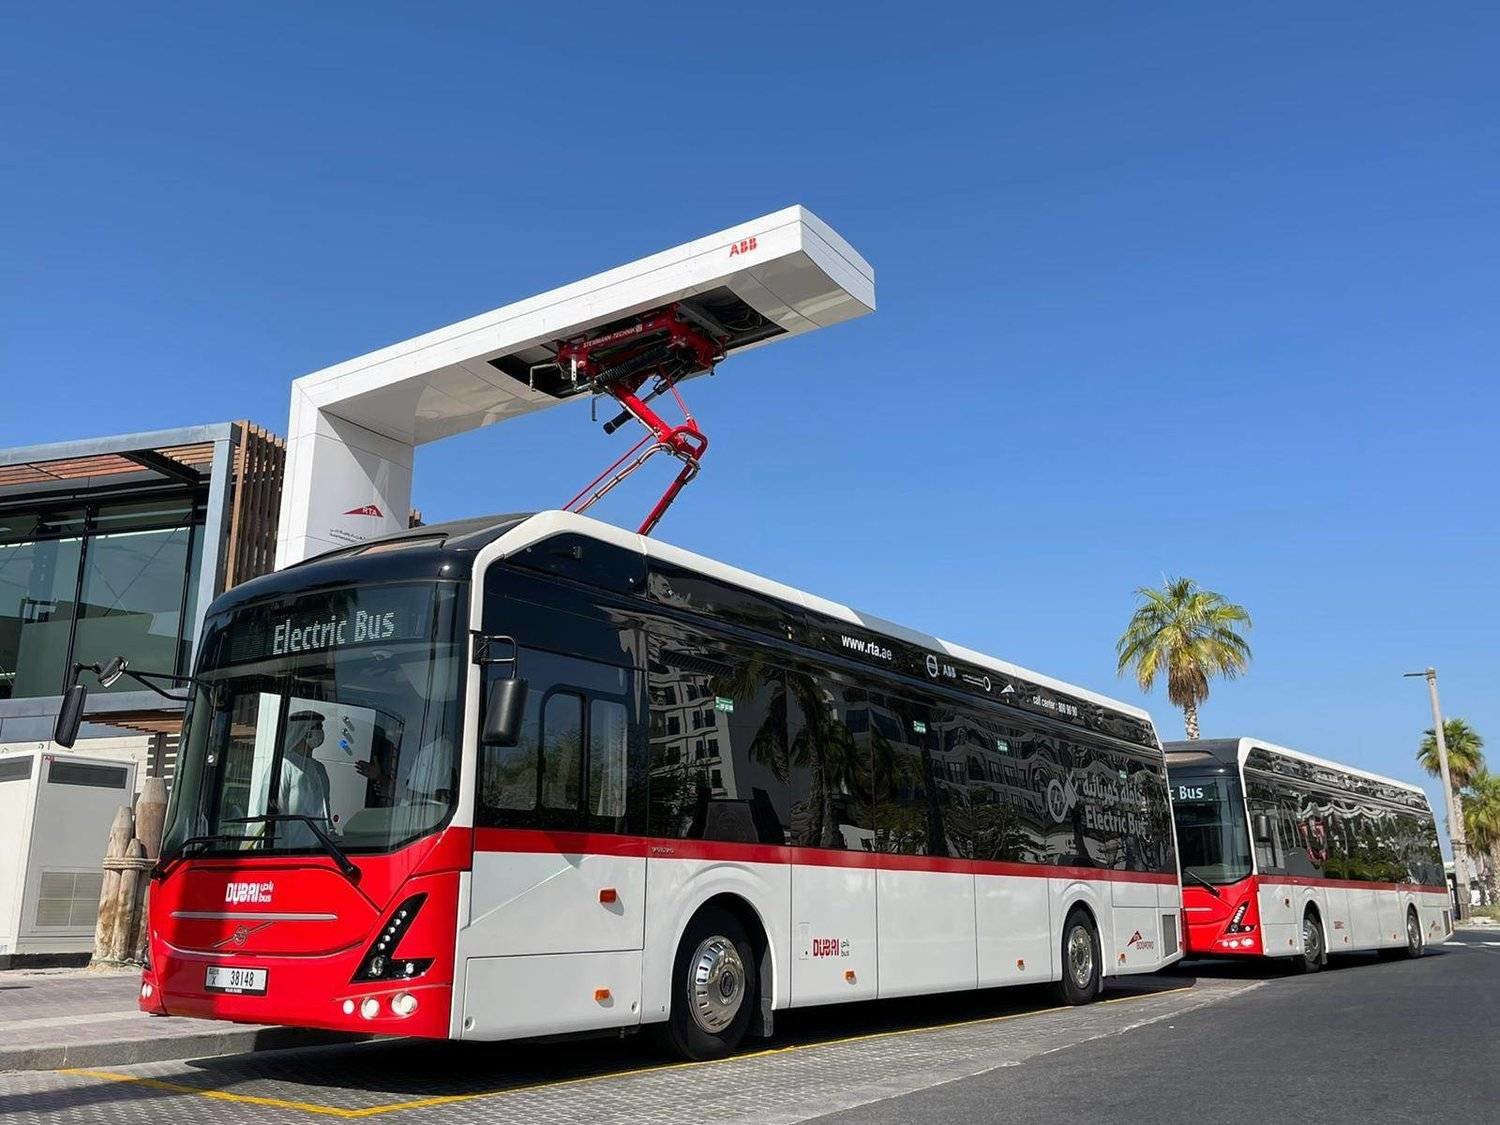 A bus is charged at a station in Dubai. (Asharq Al-Awsat)